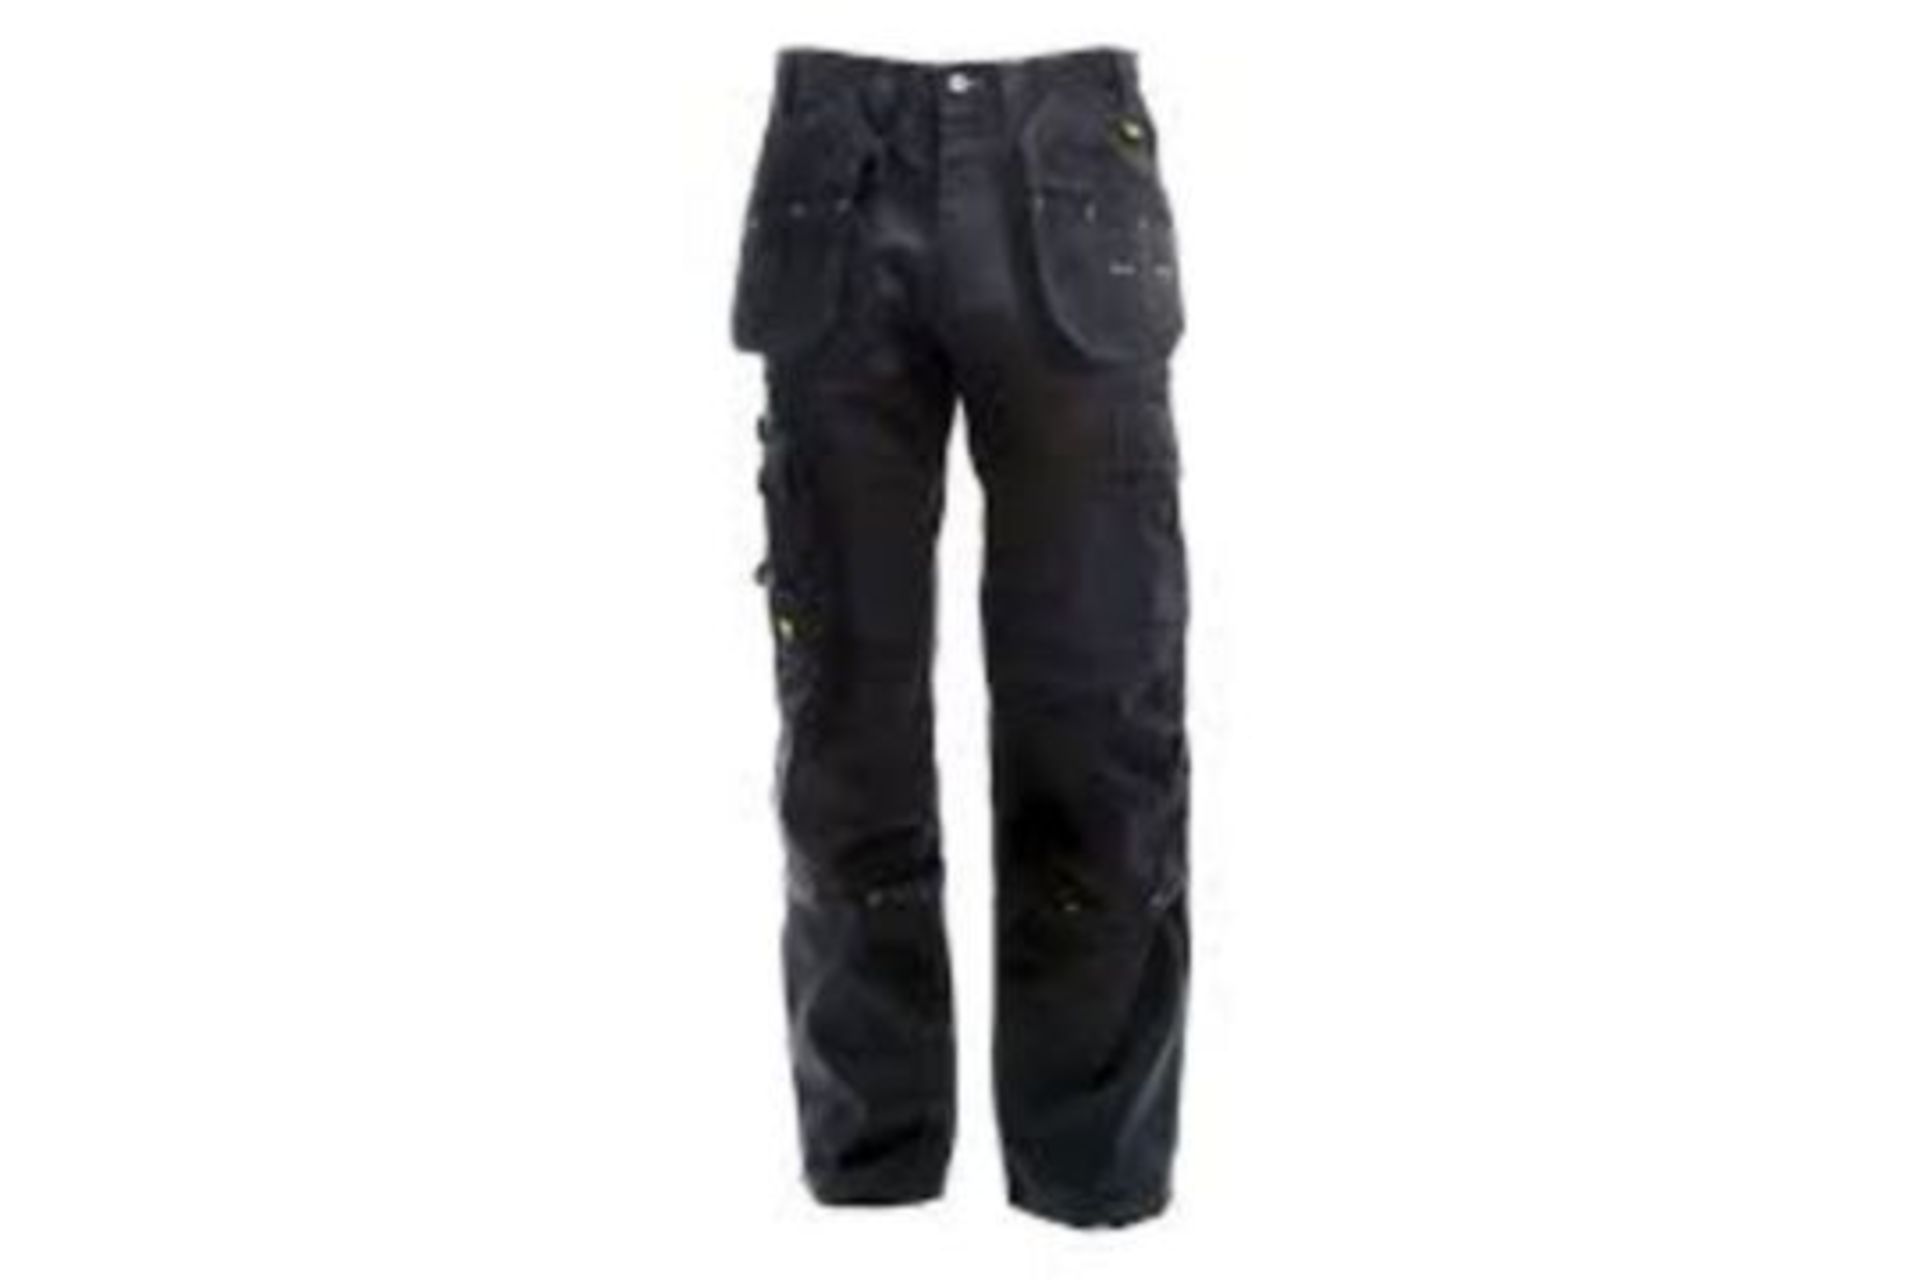 TRADE LOT 24 x NEW PACKAGED PAIRS OF DEWALT PRO TRADESMAN WORK TROUSERS. (ROW3)